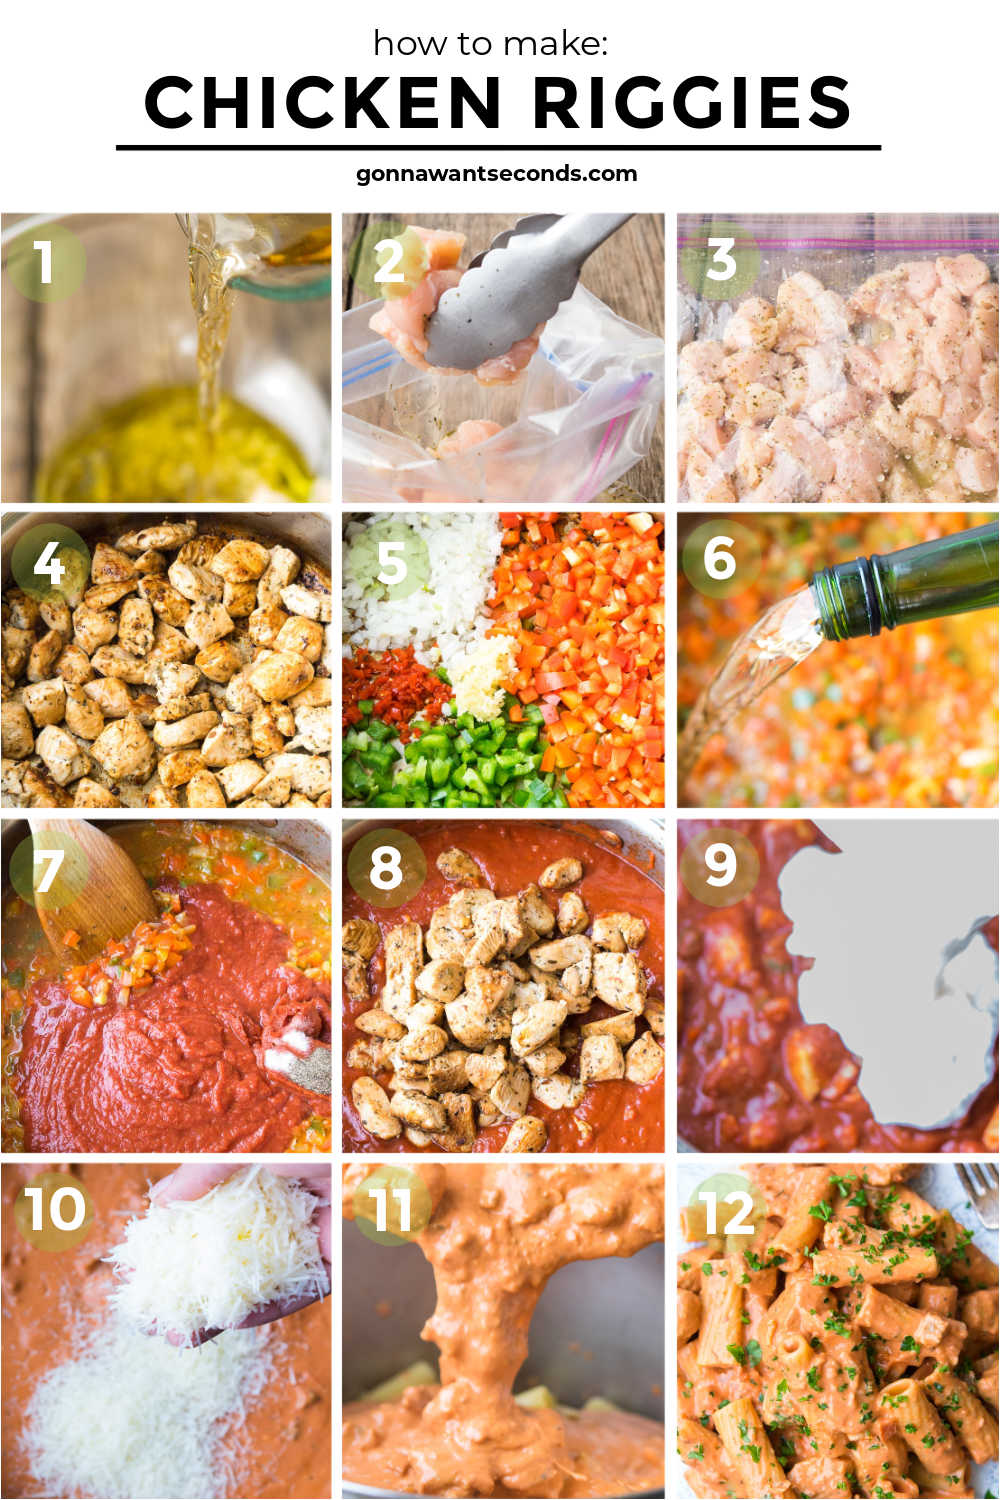 Step by step how to make chicken riggies